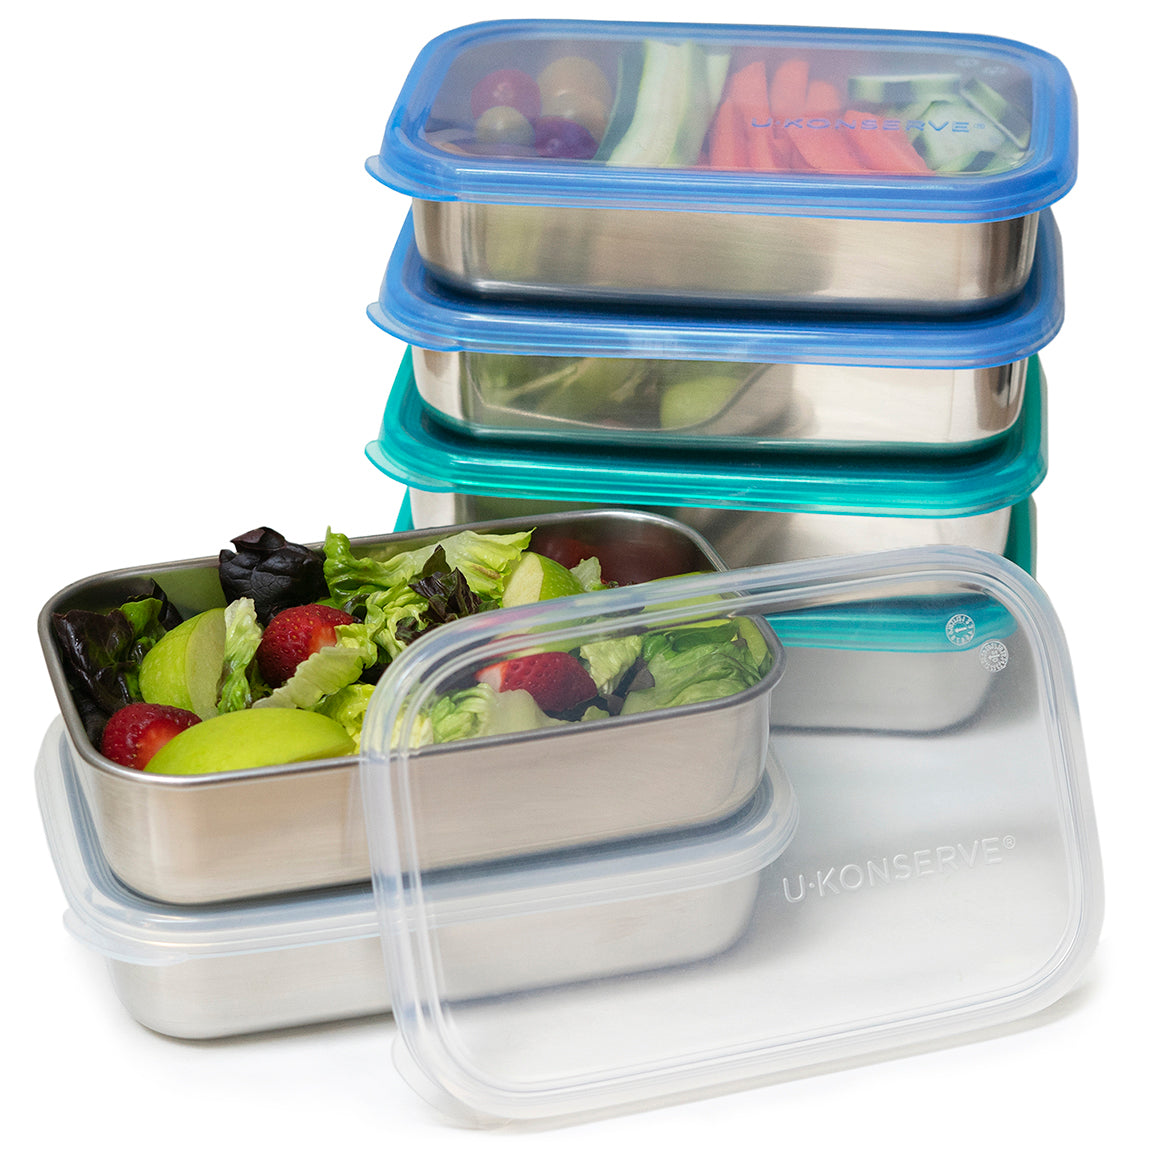 Stainless Steel Condiment Container For Lunch Box, Meal Prep